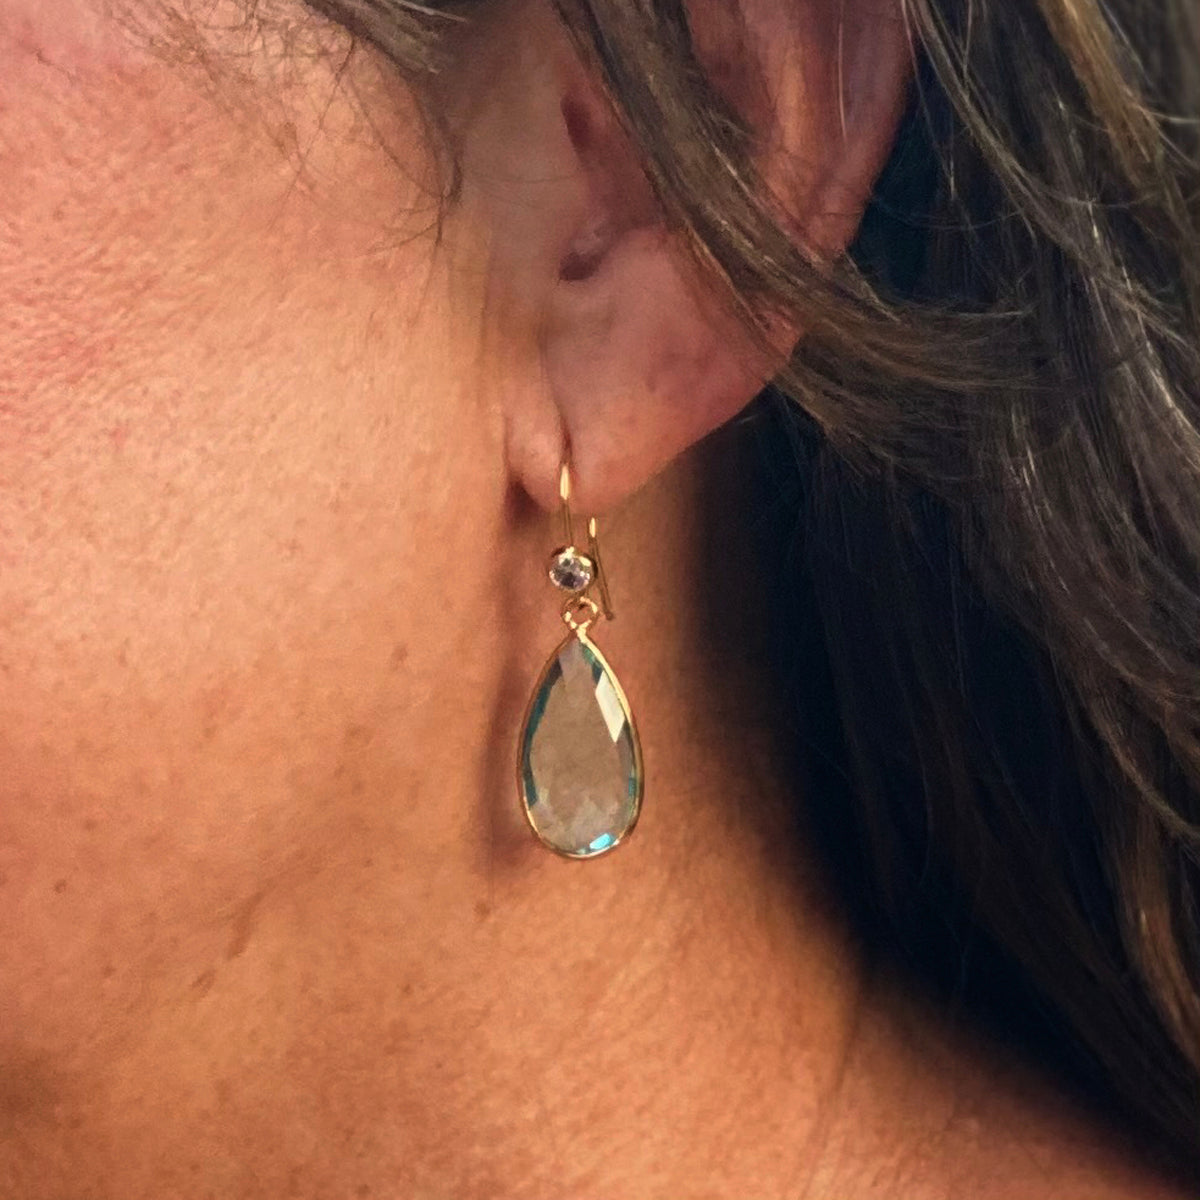 Aquamarine Crystal Earrings for Courage